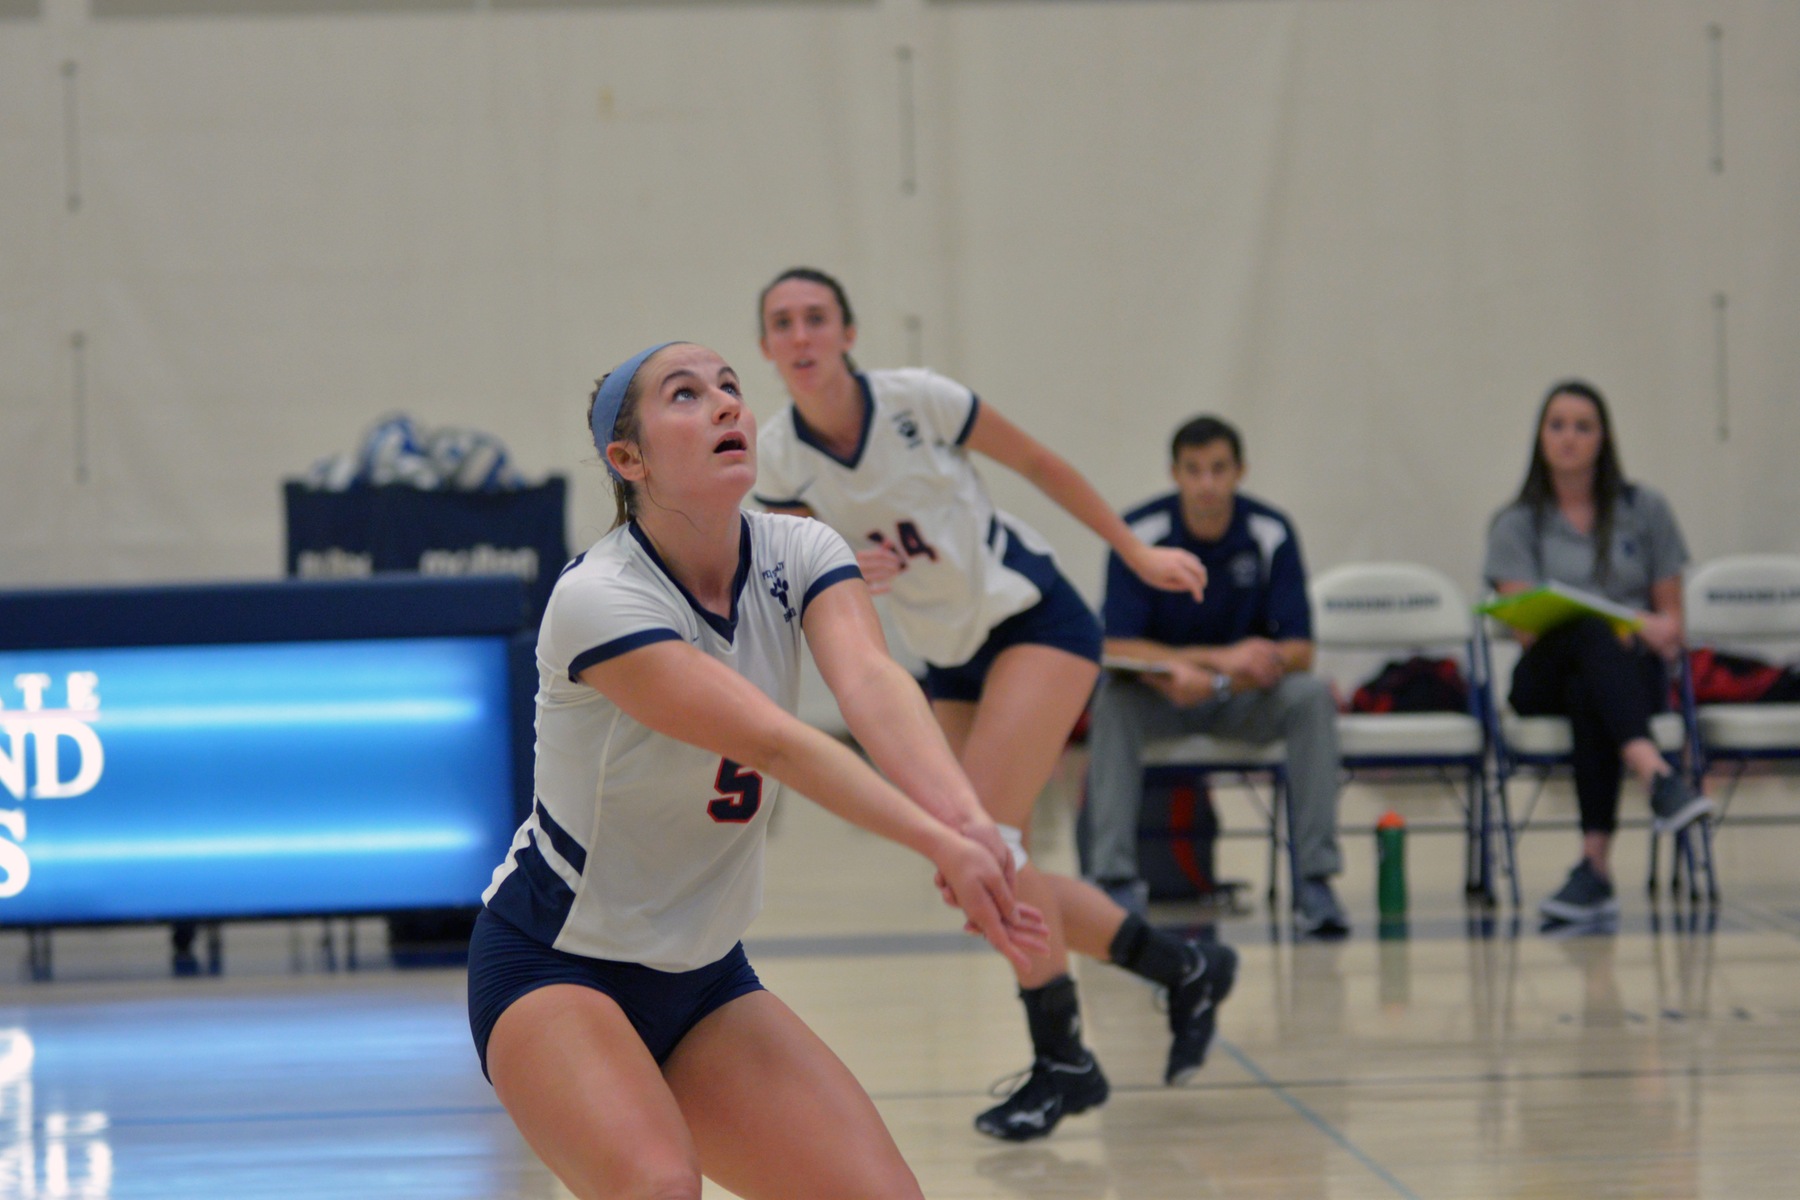 Irwin Named AMCC Volleyball Athlete of the Week